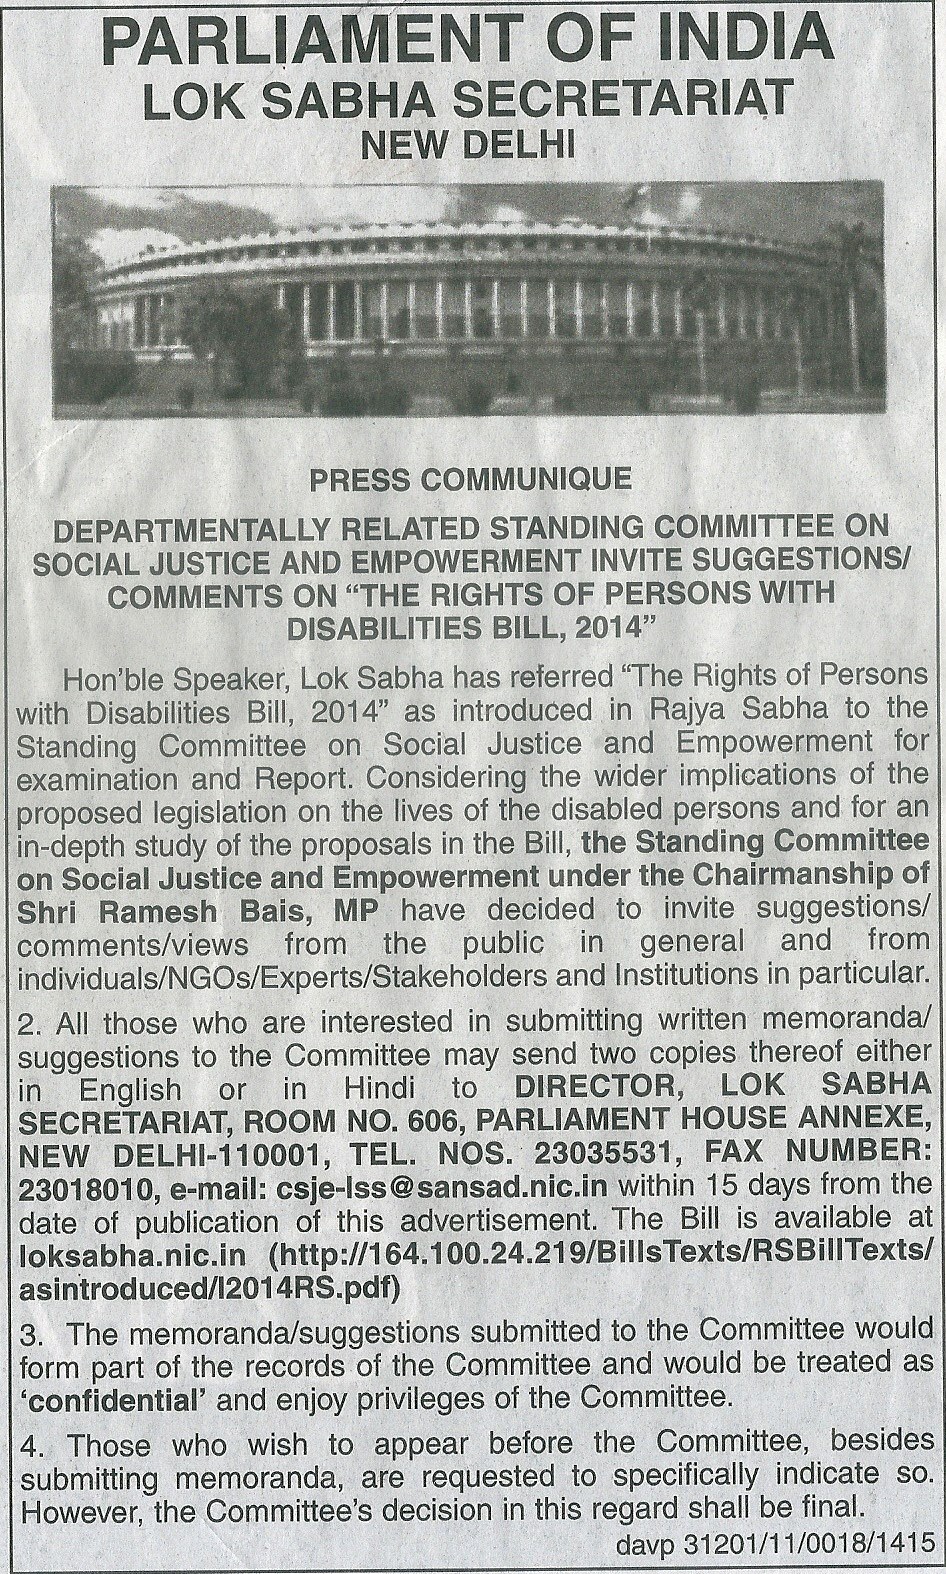 Departmentally Related Standing Committee on Social Justice & Empowerment 